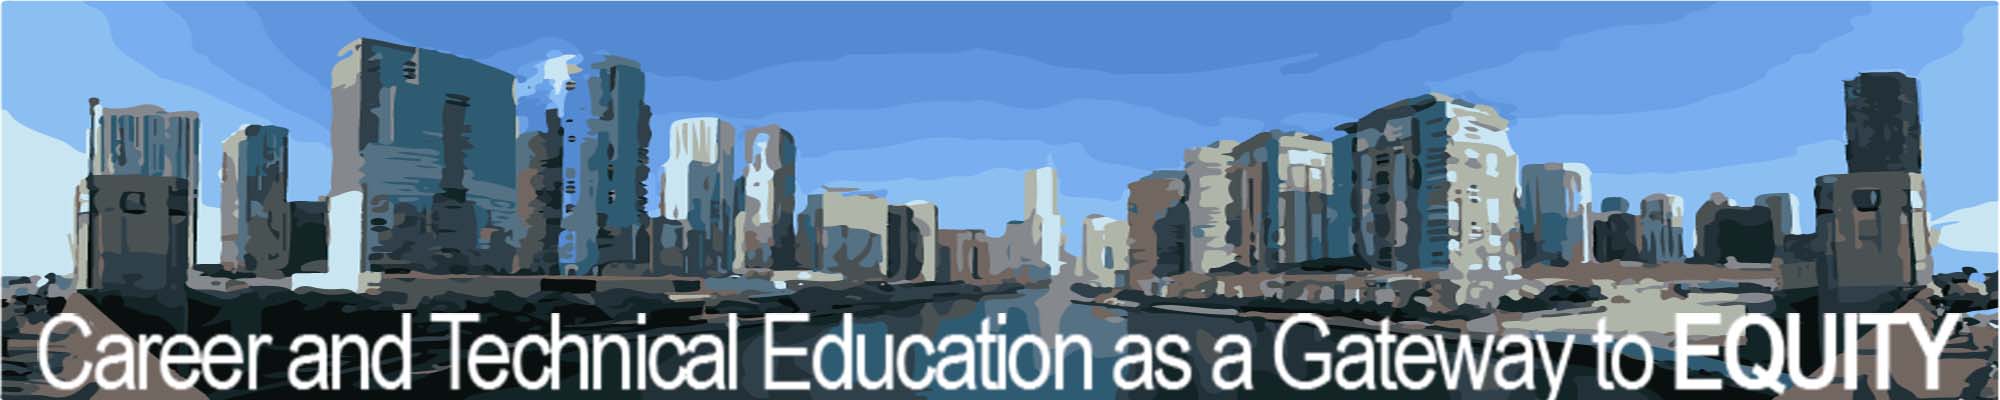 Career and Technical Education as a Gateway to Equity project banner image